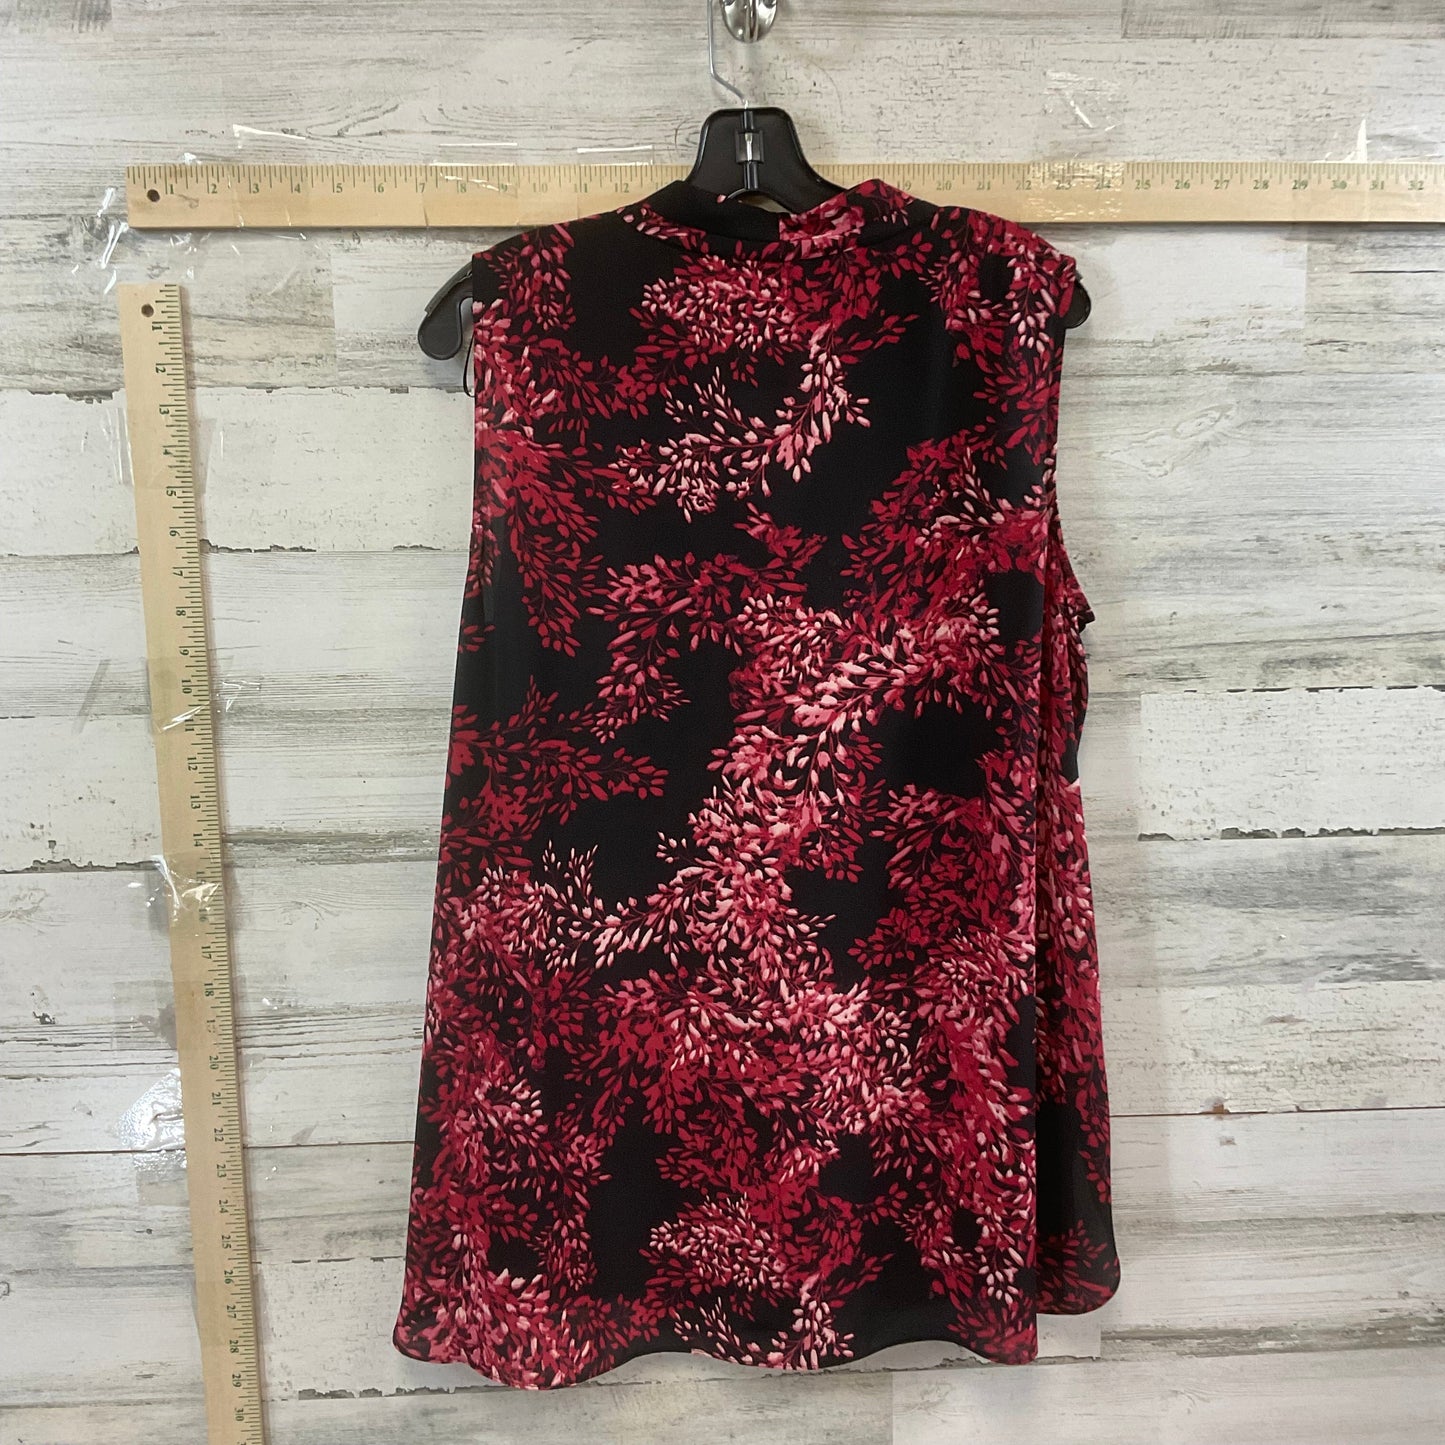 Black & Red Top Sleeveless Vince Camuto, Size 1x